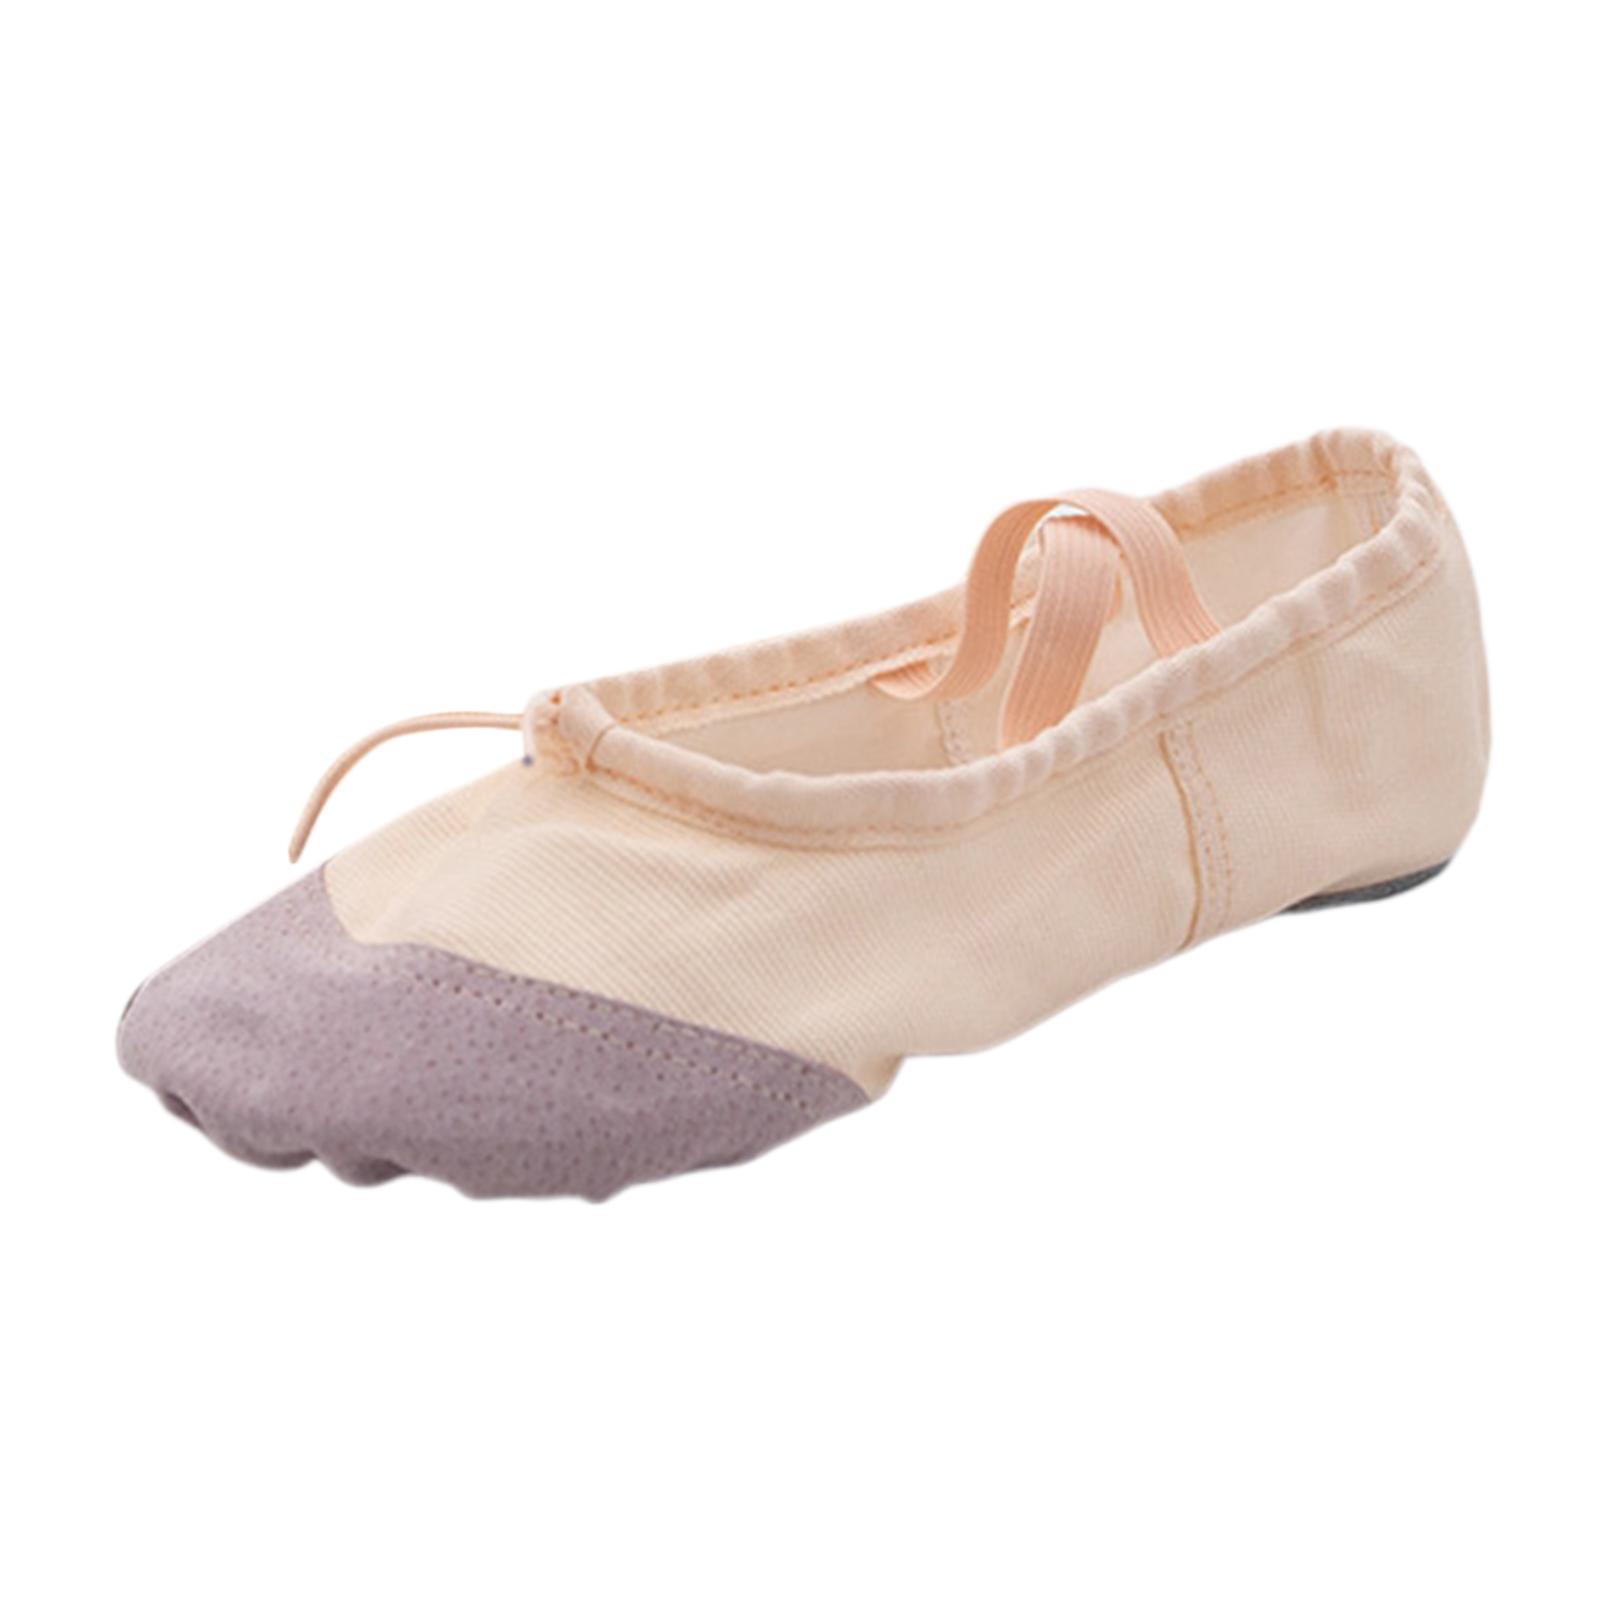 Women Ballet Shoes Ballerina Shoes Closed Toe Professional Soft Sole Low Heel Canvas Dance Shoes Flats for Gymnastic Ballet Practice Adults